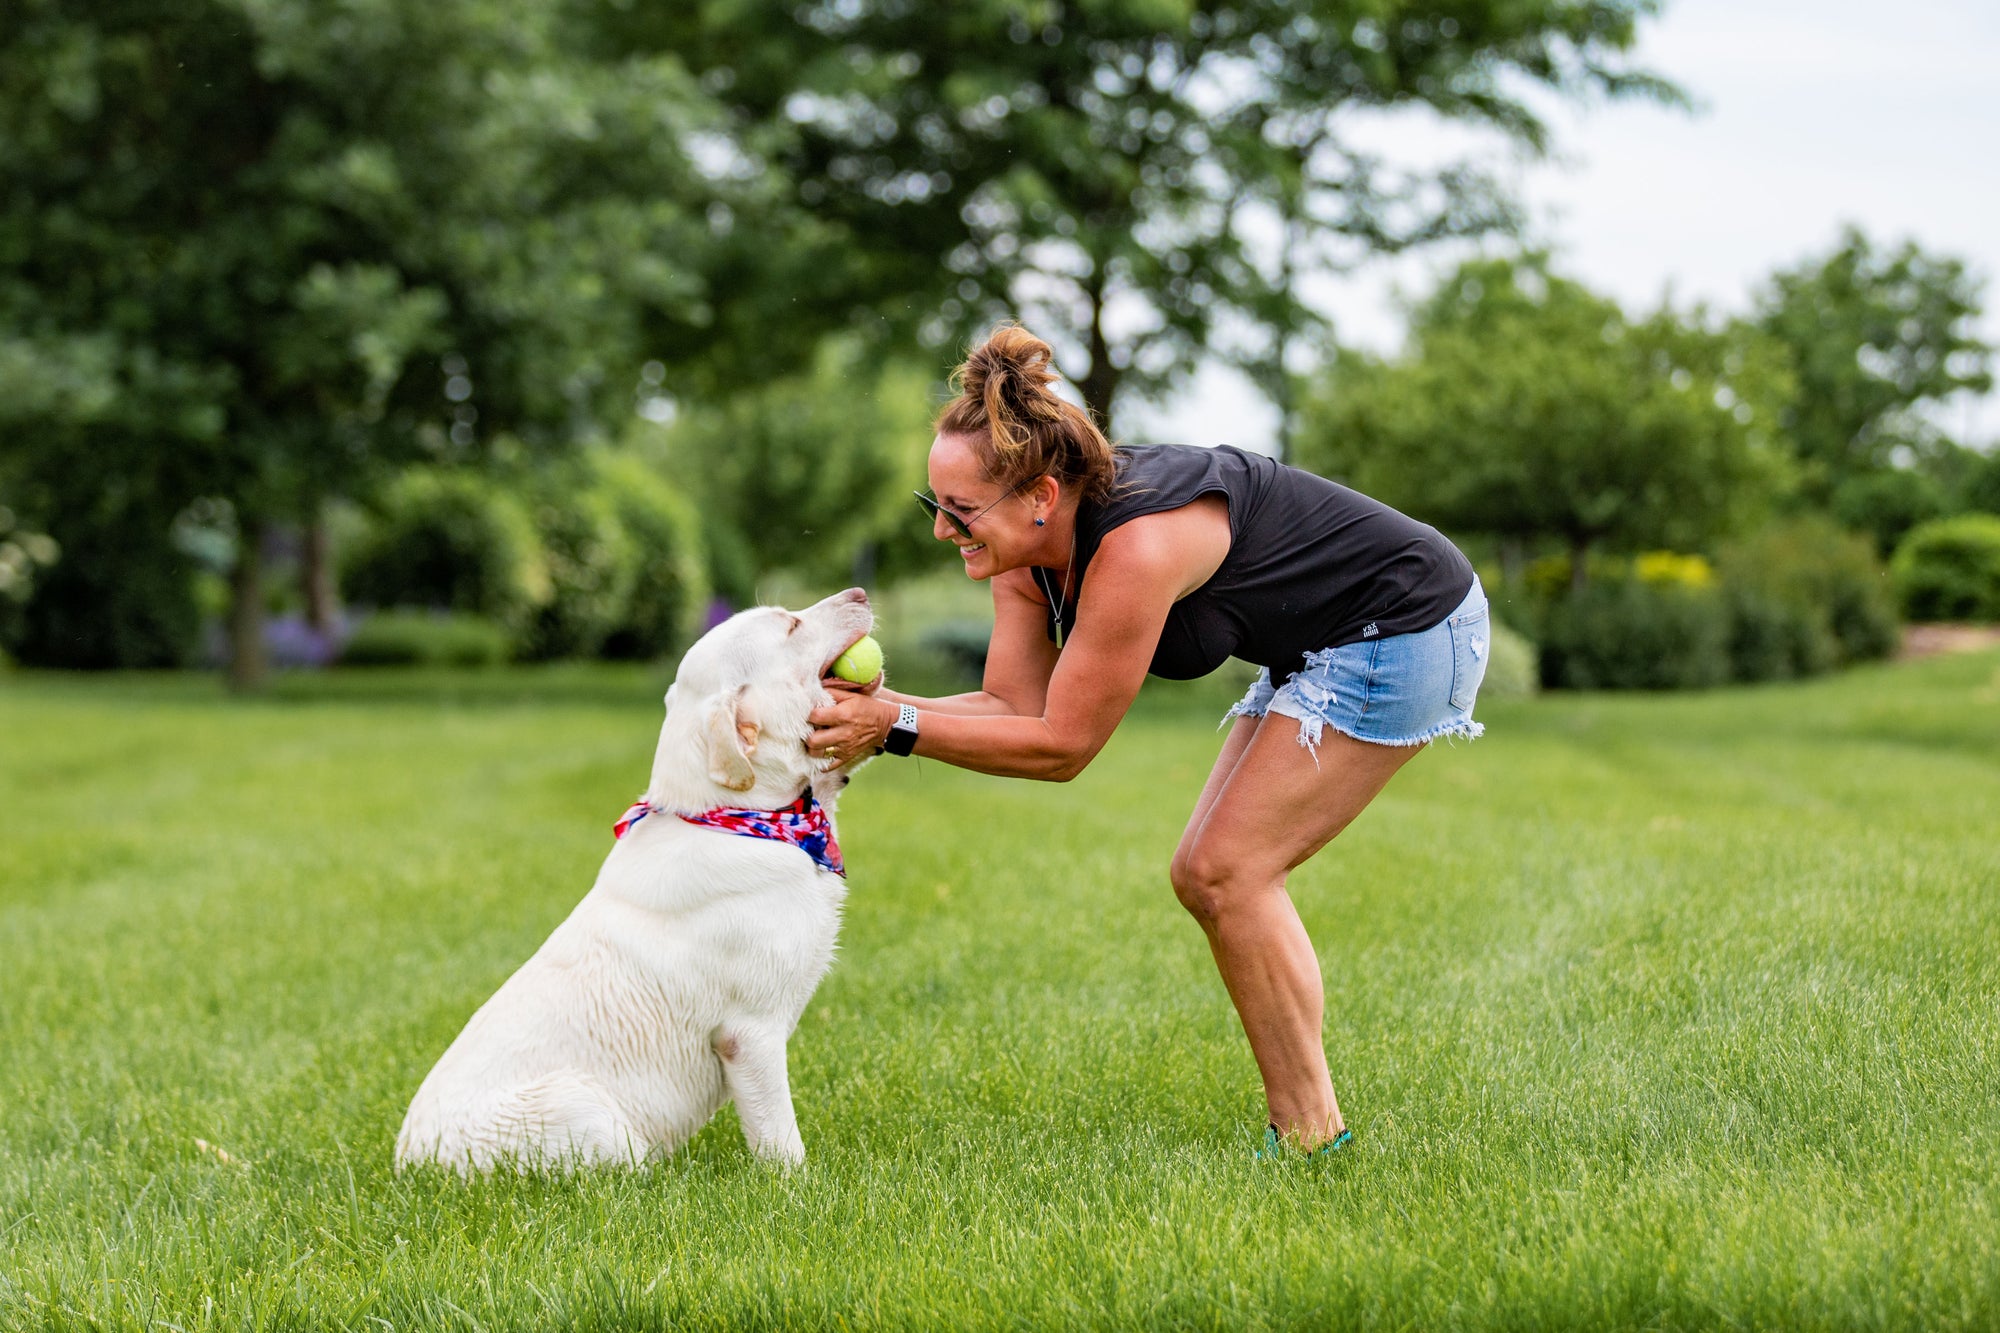 What Makes Dog People Different: The Bond Between A Dog and Owner